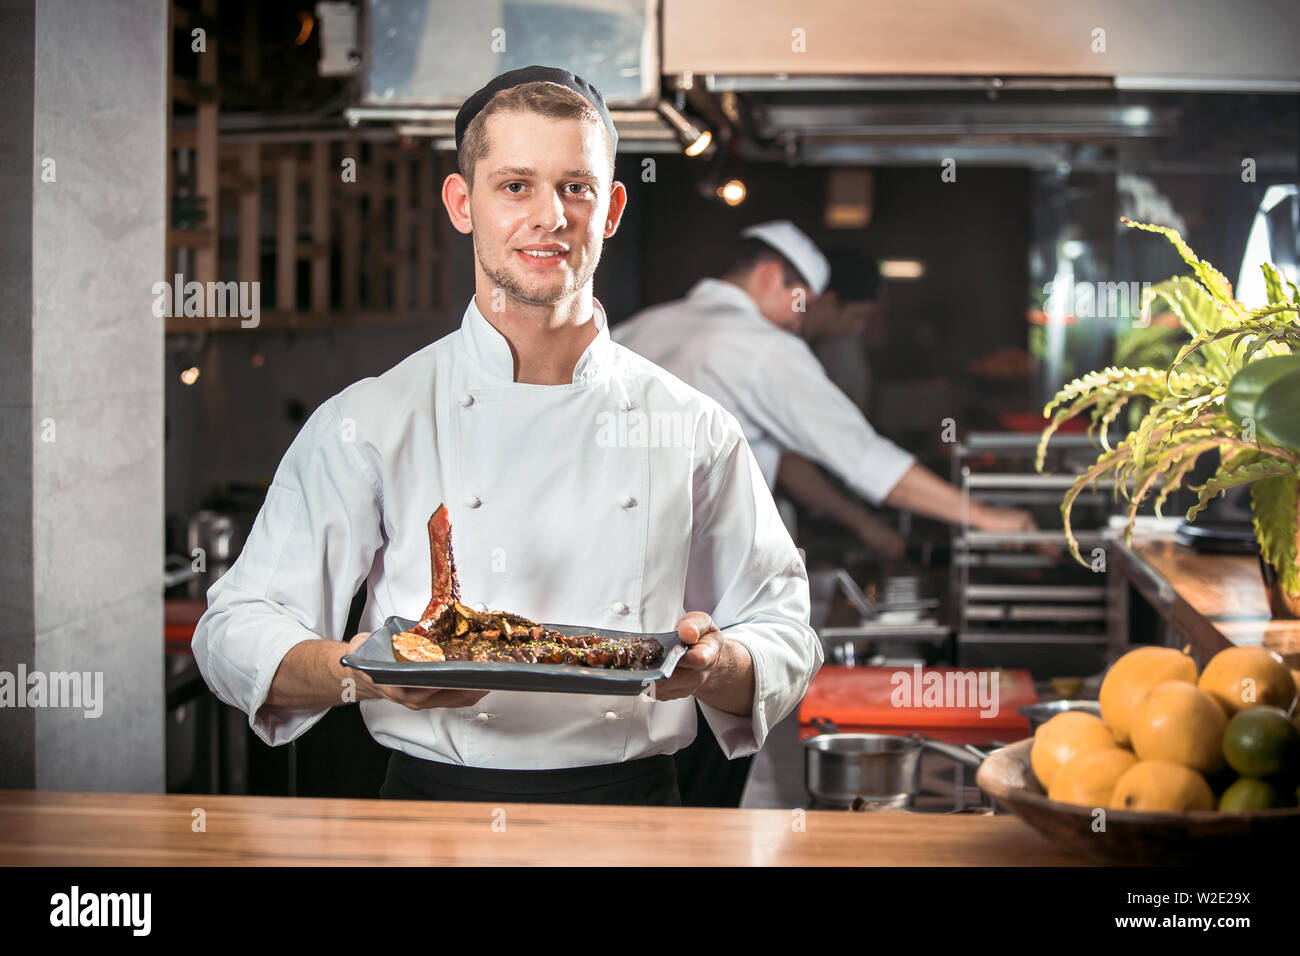 Smiling handsome male cook holding dish in the restaurant kitchen Stock Photo